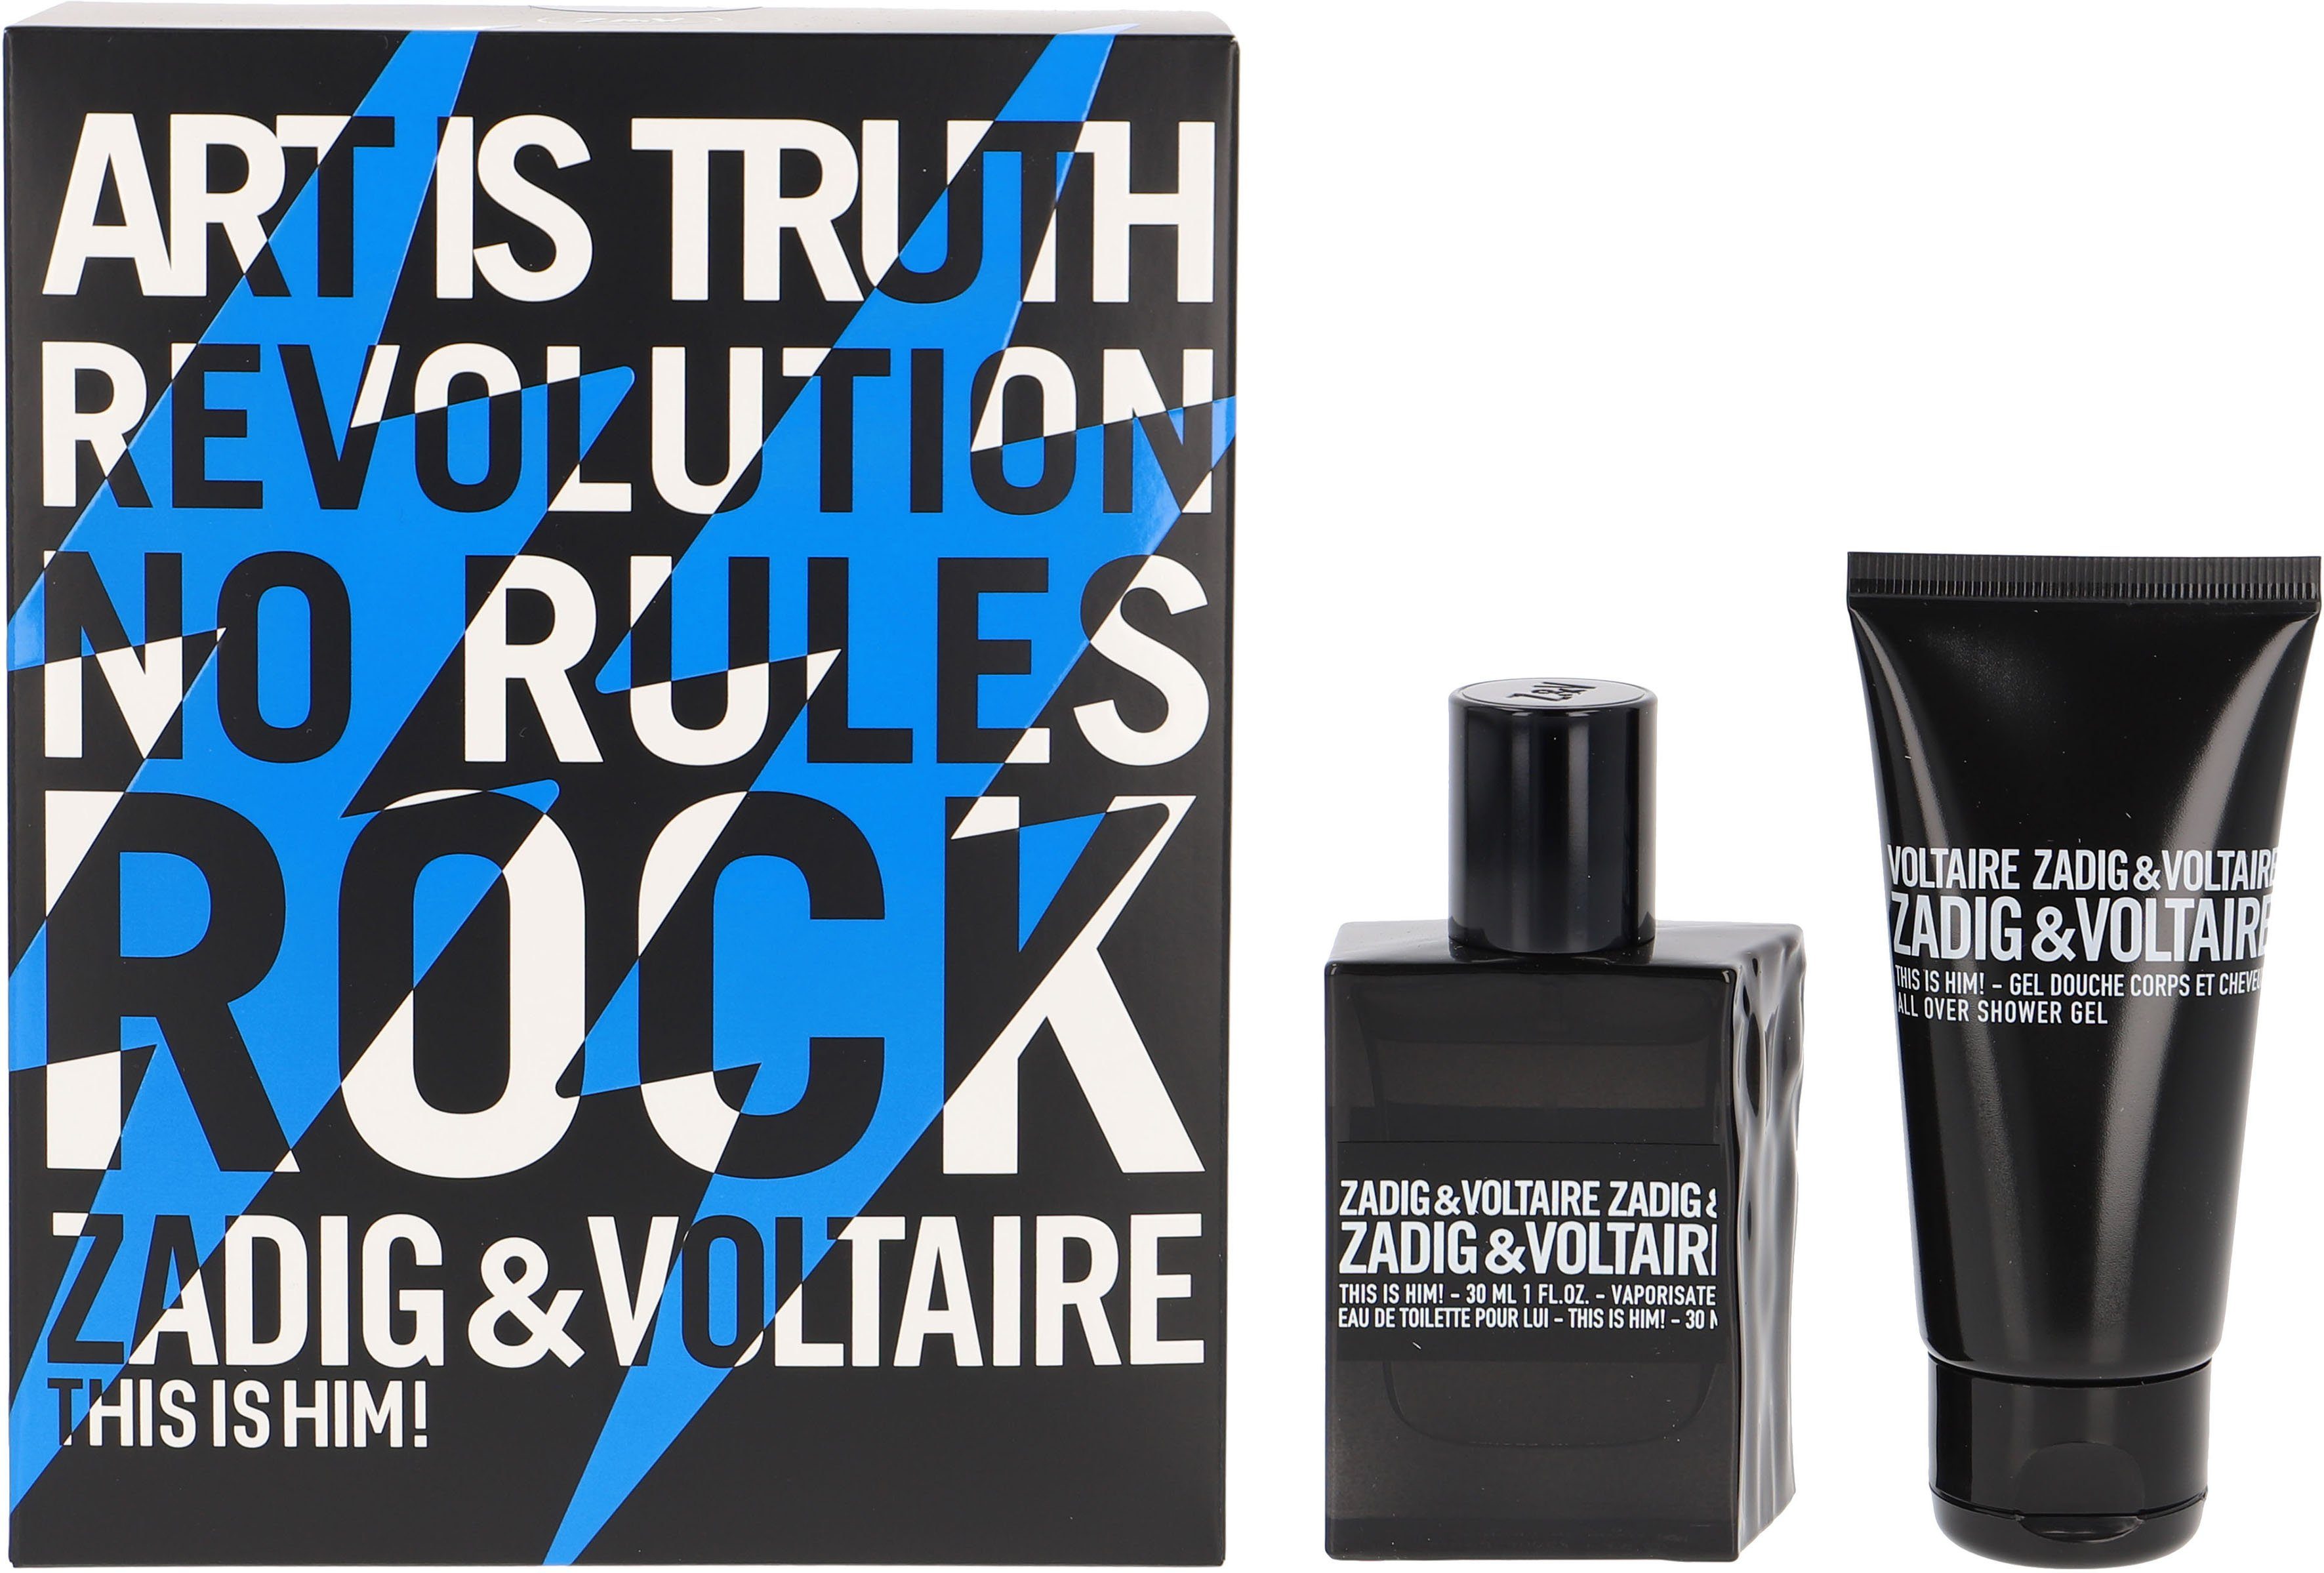 2-tlg. & Him!, This Duft-Set ZADIG VOLTAIRE is